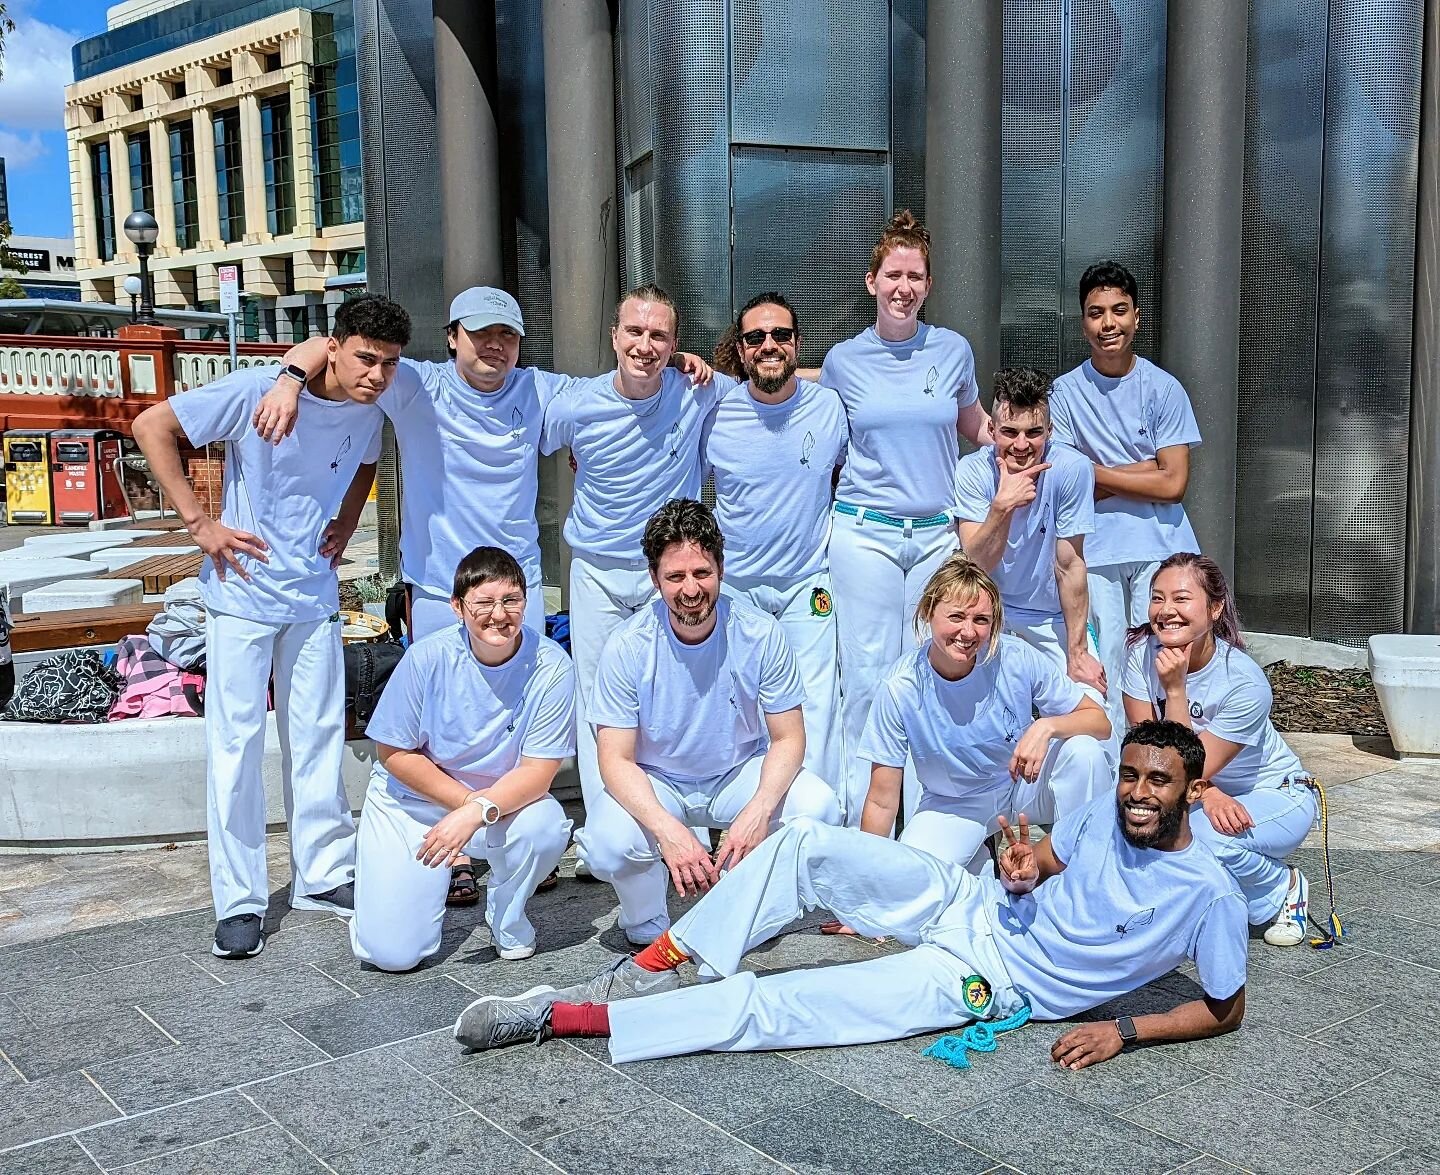 Today our group got the opportunity to showcase their Capoeira skills in Yagan Square as part of Perth's 'Live and Loud' series.
This was particularly exciting as it was some of our students' first time performing in public! 😃 Huge thank you to all 